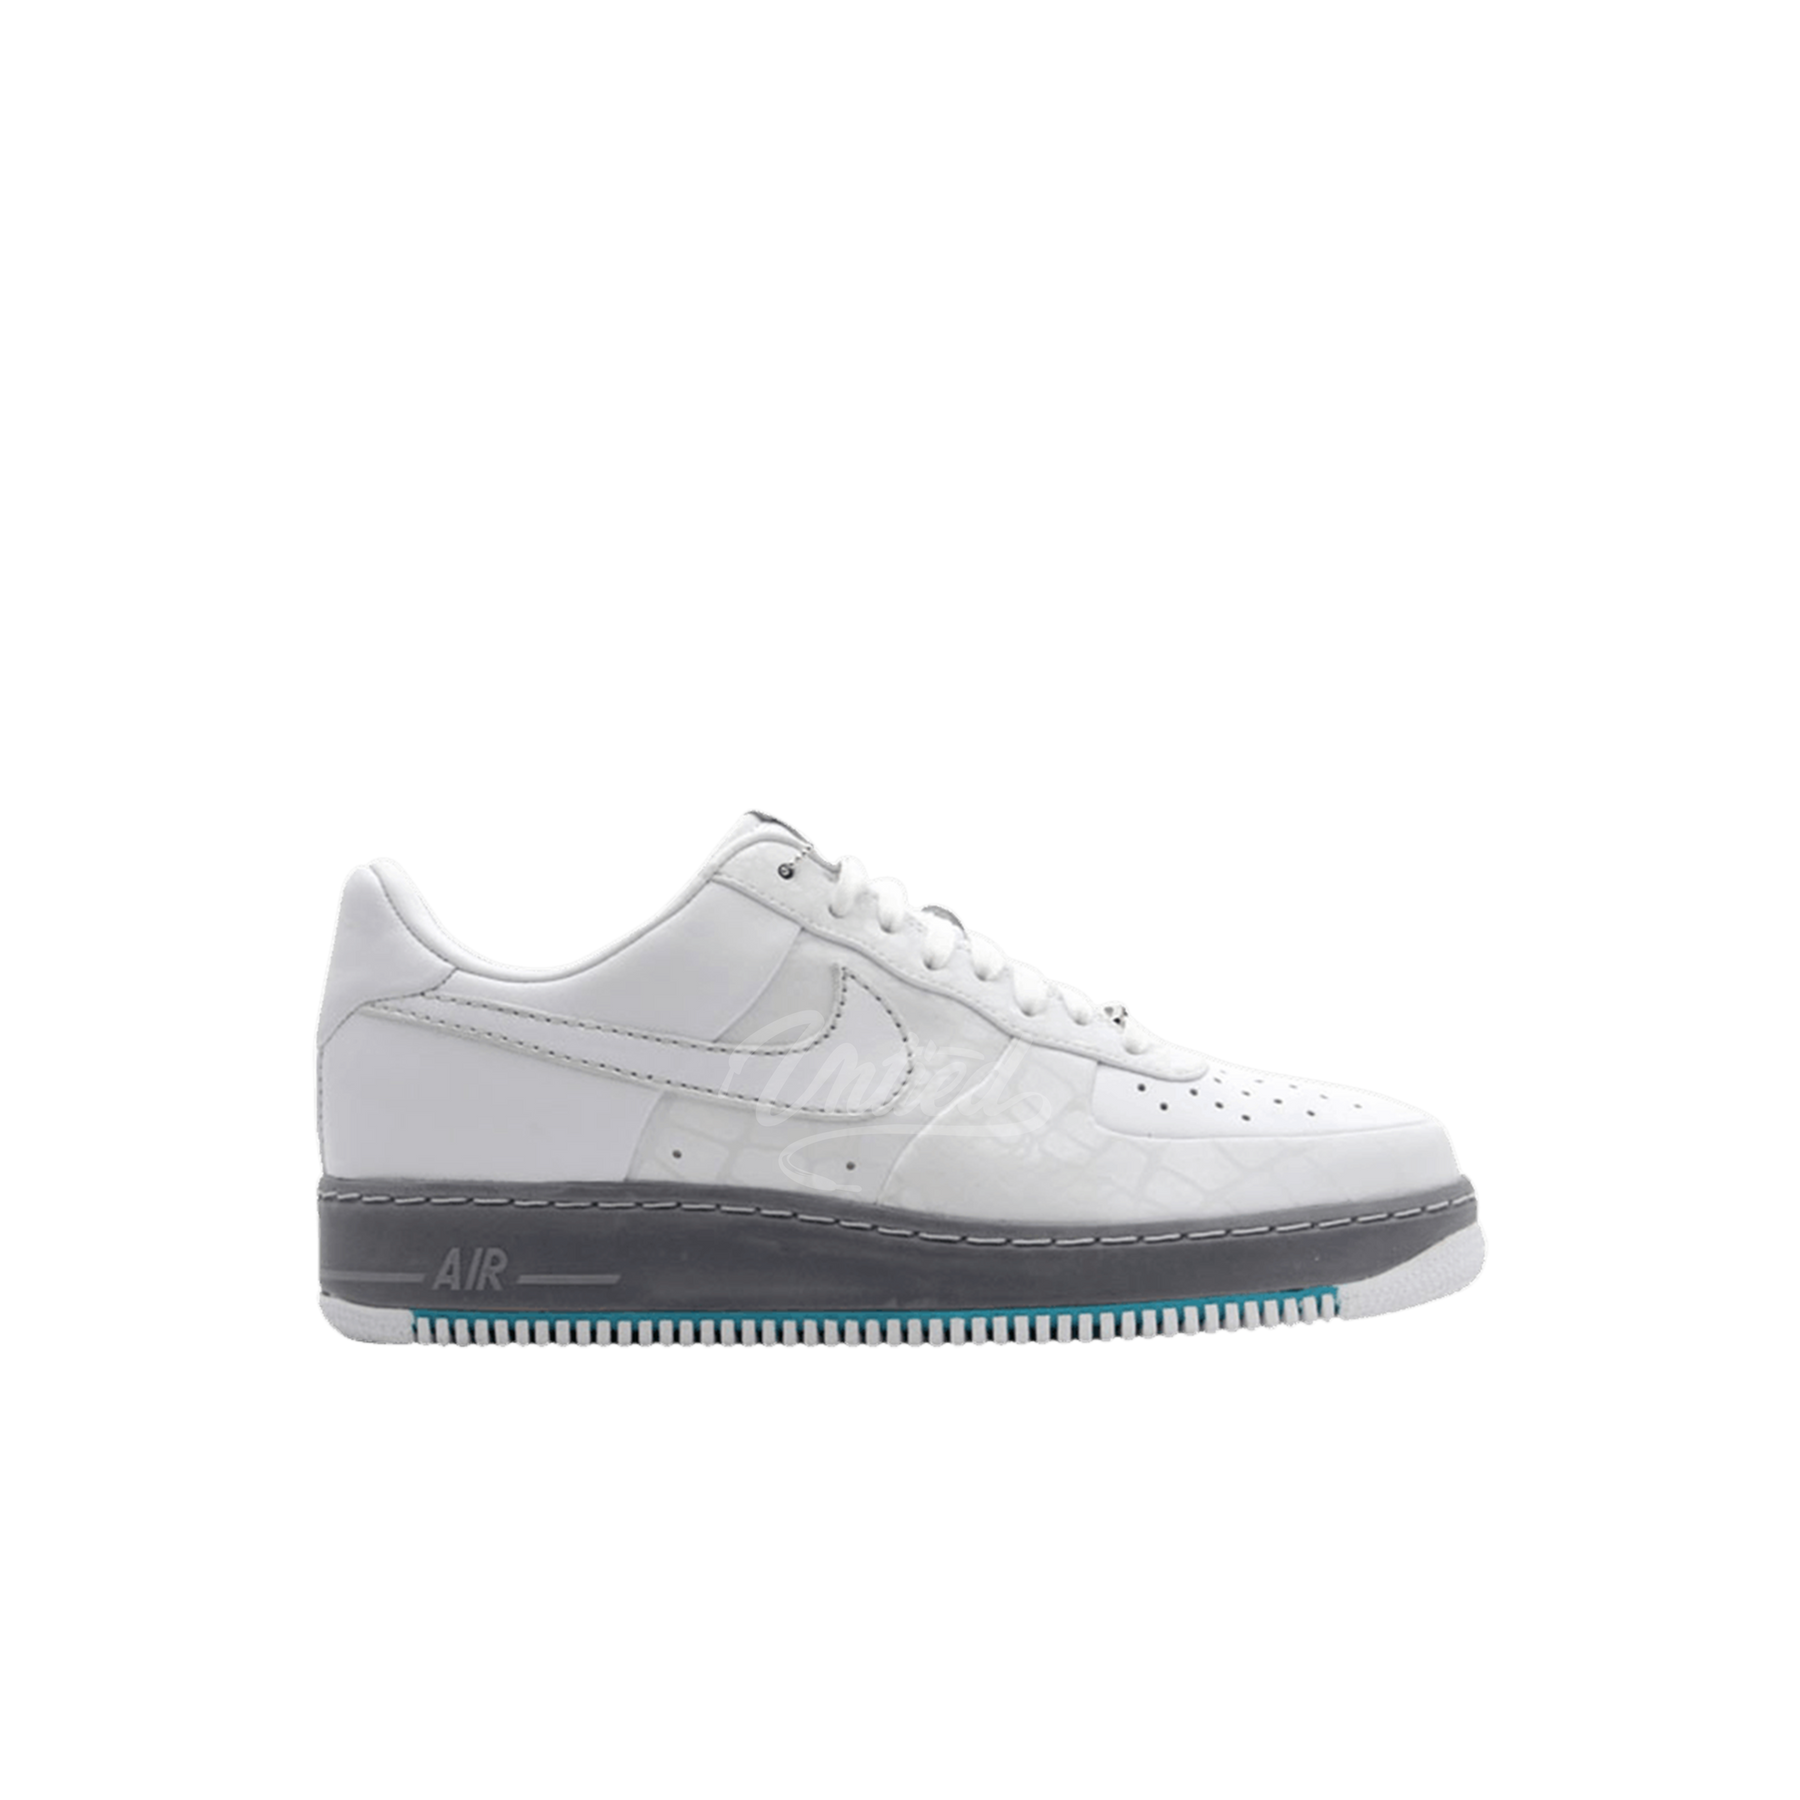 Air Force 1 "Rosie's Dry Goods White"